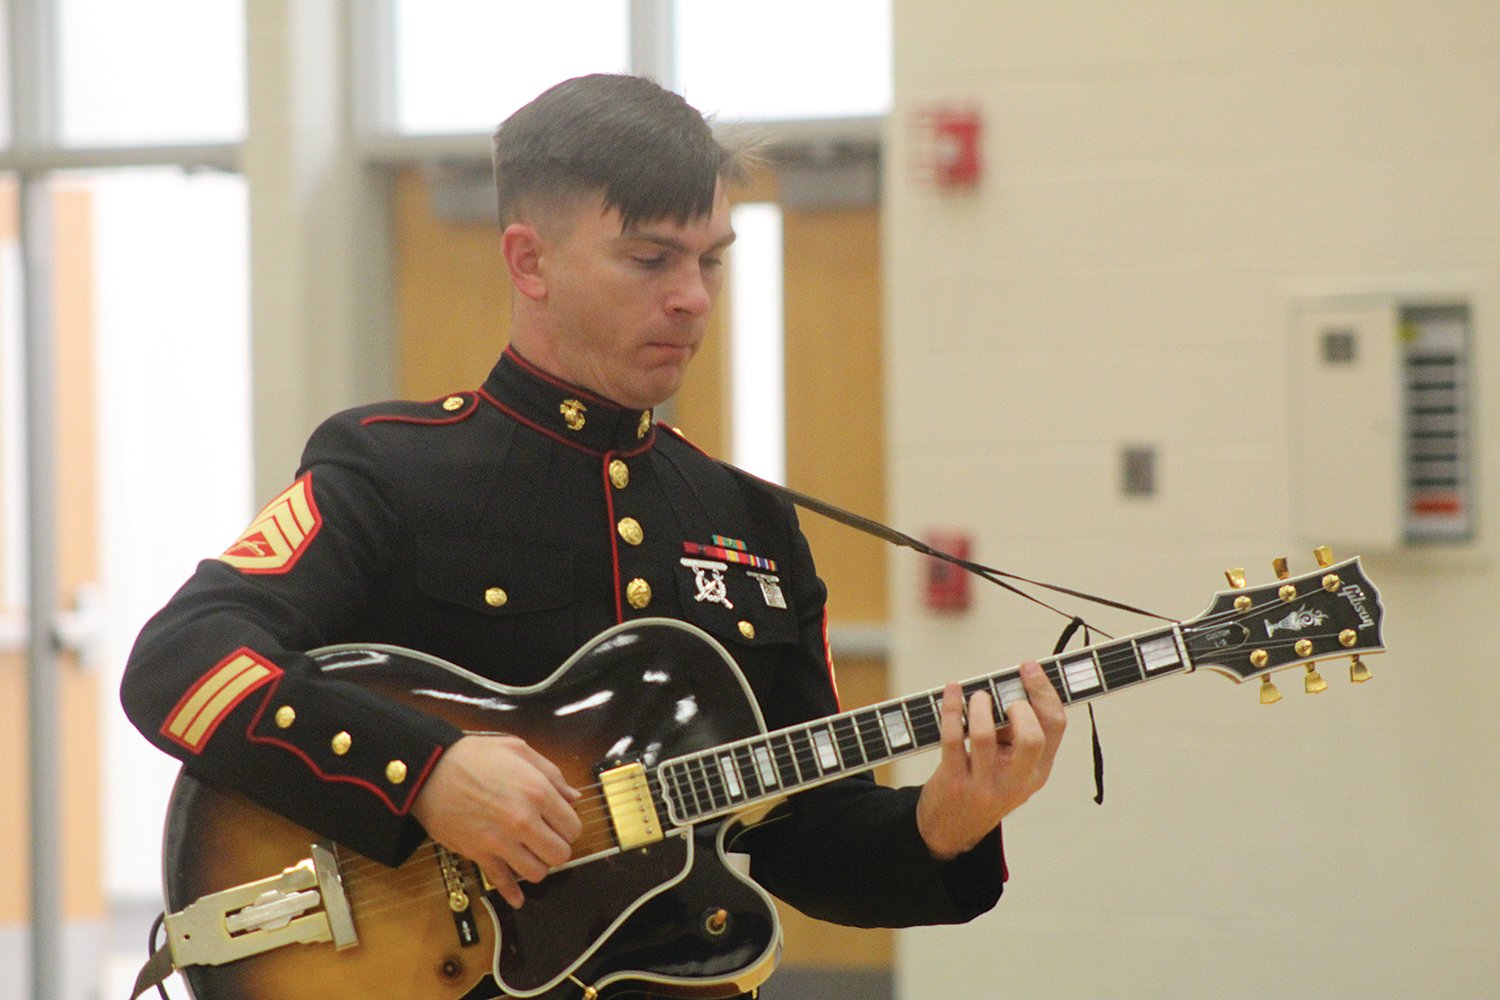 Staff Sgt. Neil Egan and his guitar provided the band with a steady sound.